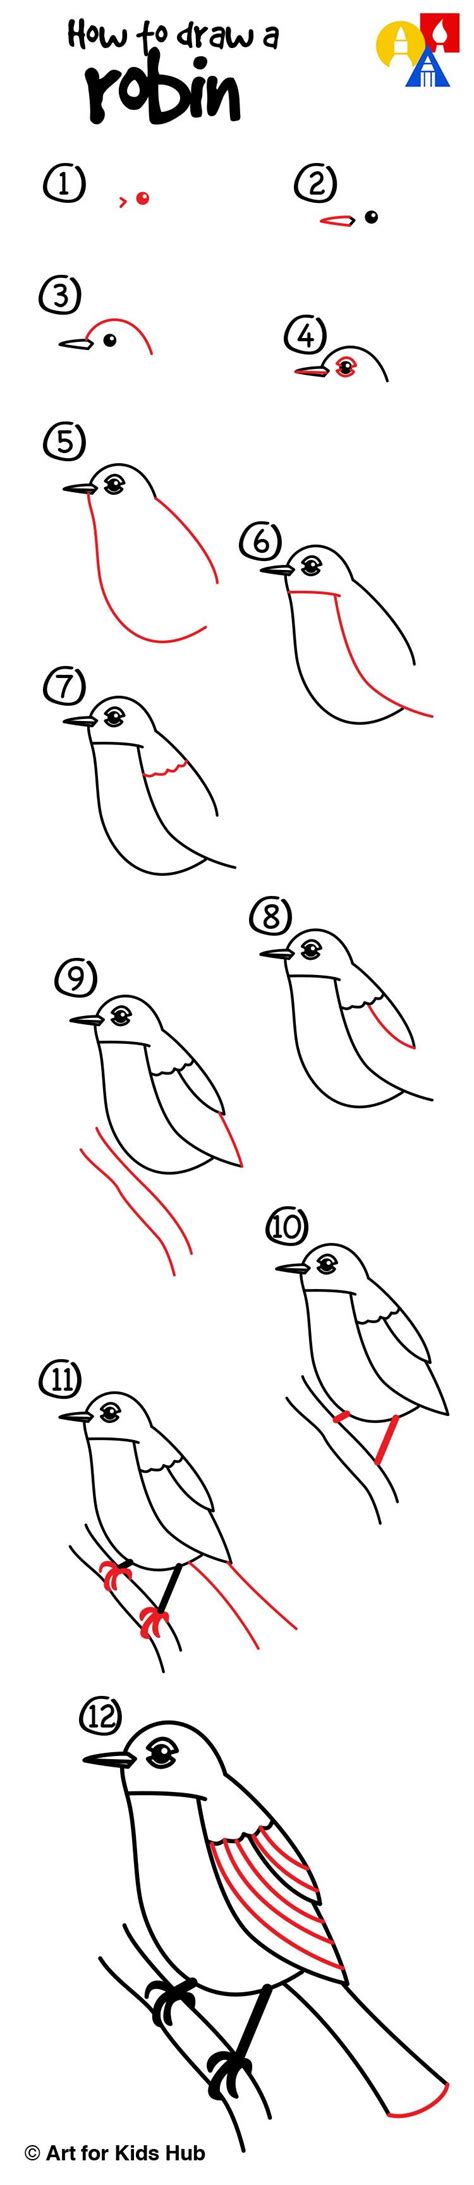 How To Draw A Robin Bird Realistic Art For Kids Hub